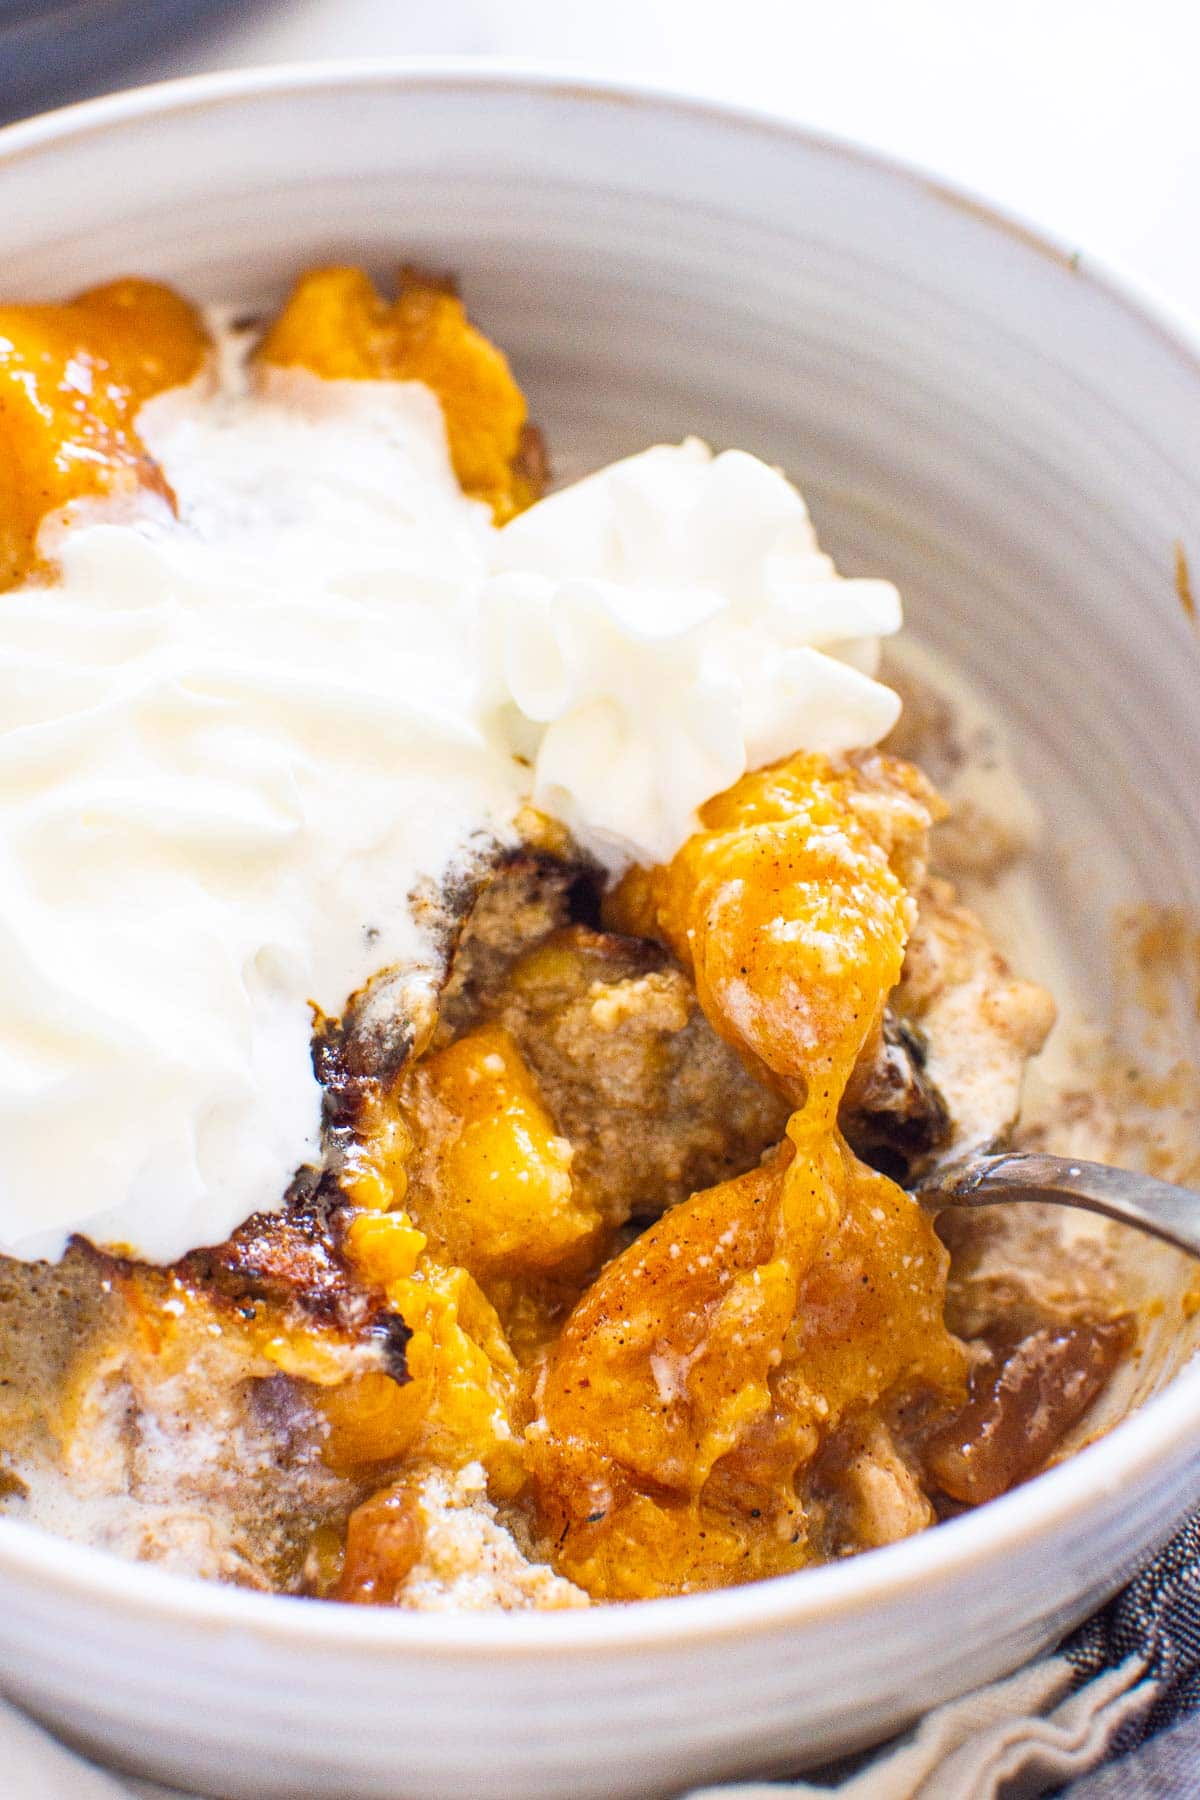 Instant pot peach cobbler in bowl with spoon and whipped cream.